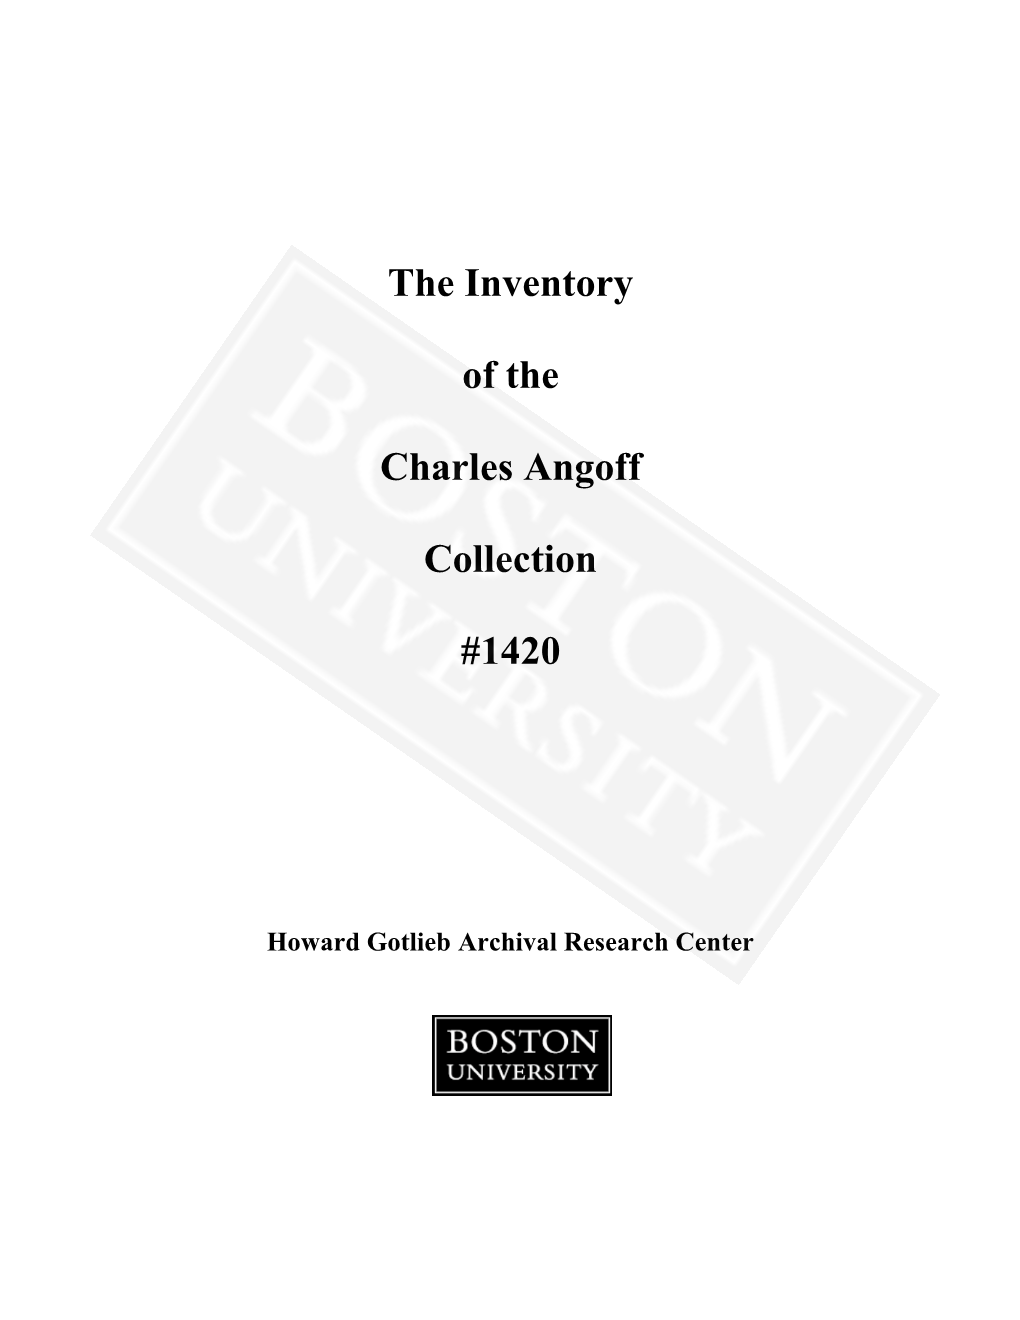 The Inventory of the Charles Angoff Collection #1420